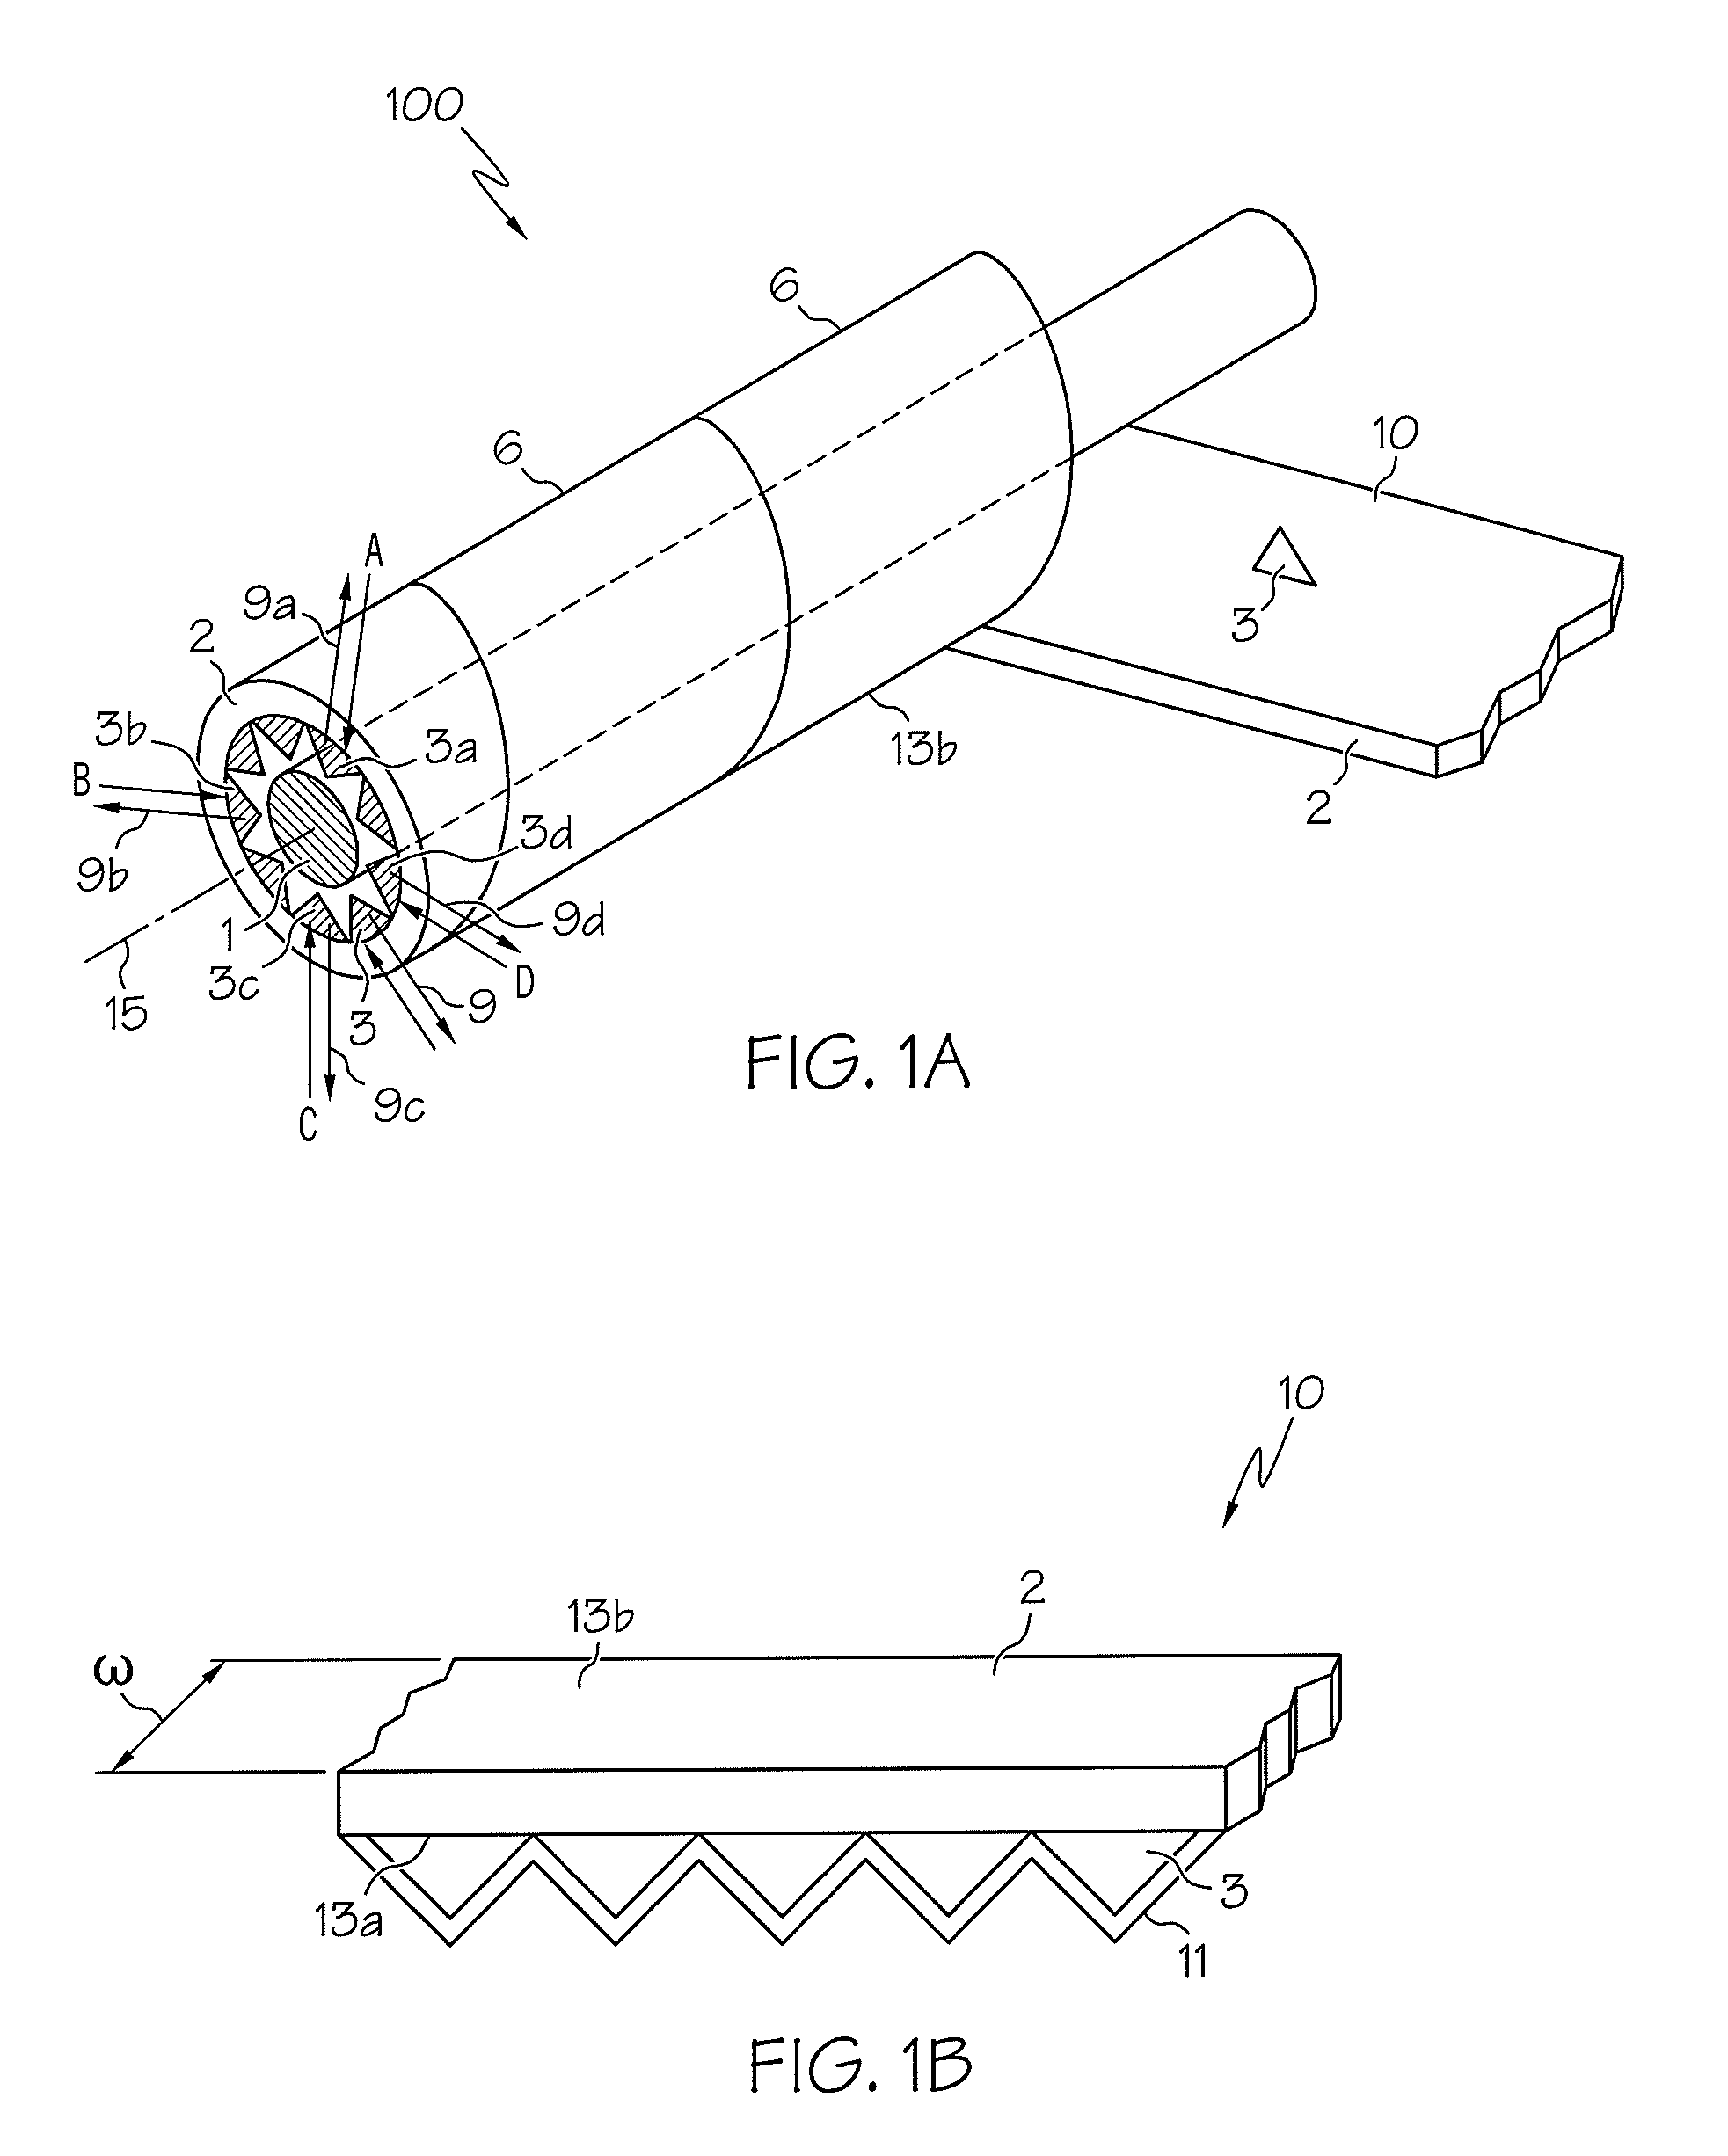 Methods of forming retroflective structures having a helical geometry